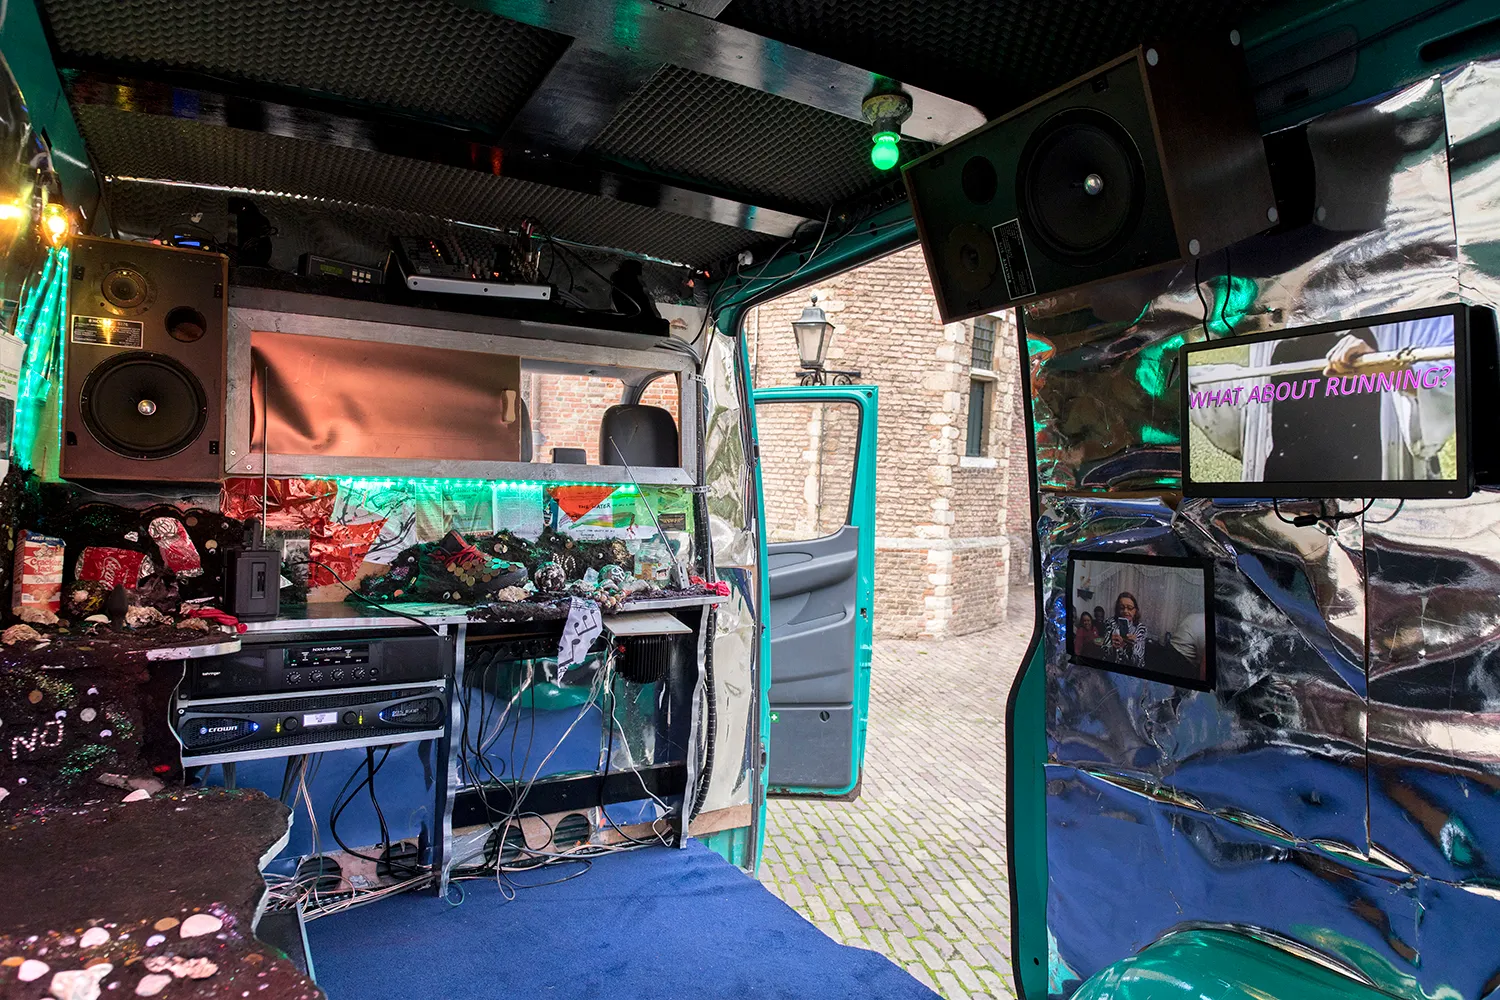 Interior of the van with a.o. screens, speakers, radio’s and blue carpet